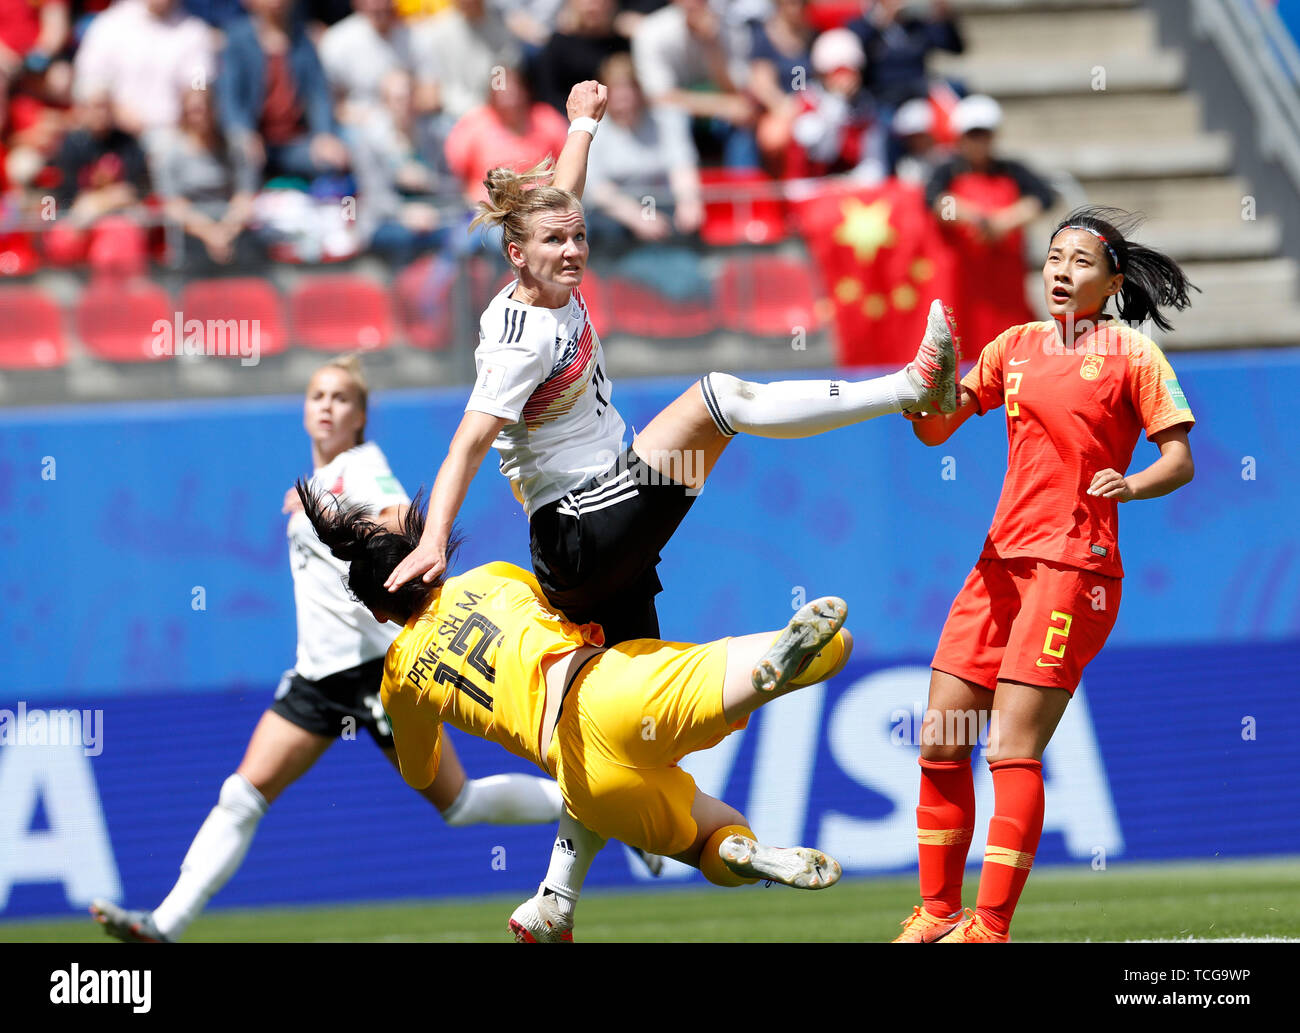 Rennes, France. 8th June, 2019. Alexandra Popp (Top) of Germany competes during the group B match between Germany and China at the 2019 FIFA Women's World Cup in Rennes, France, June 8, 2019. Credit: Ding Xu/Xinhua/Alamy Live News Stock Photo